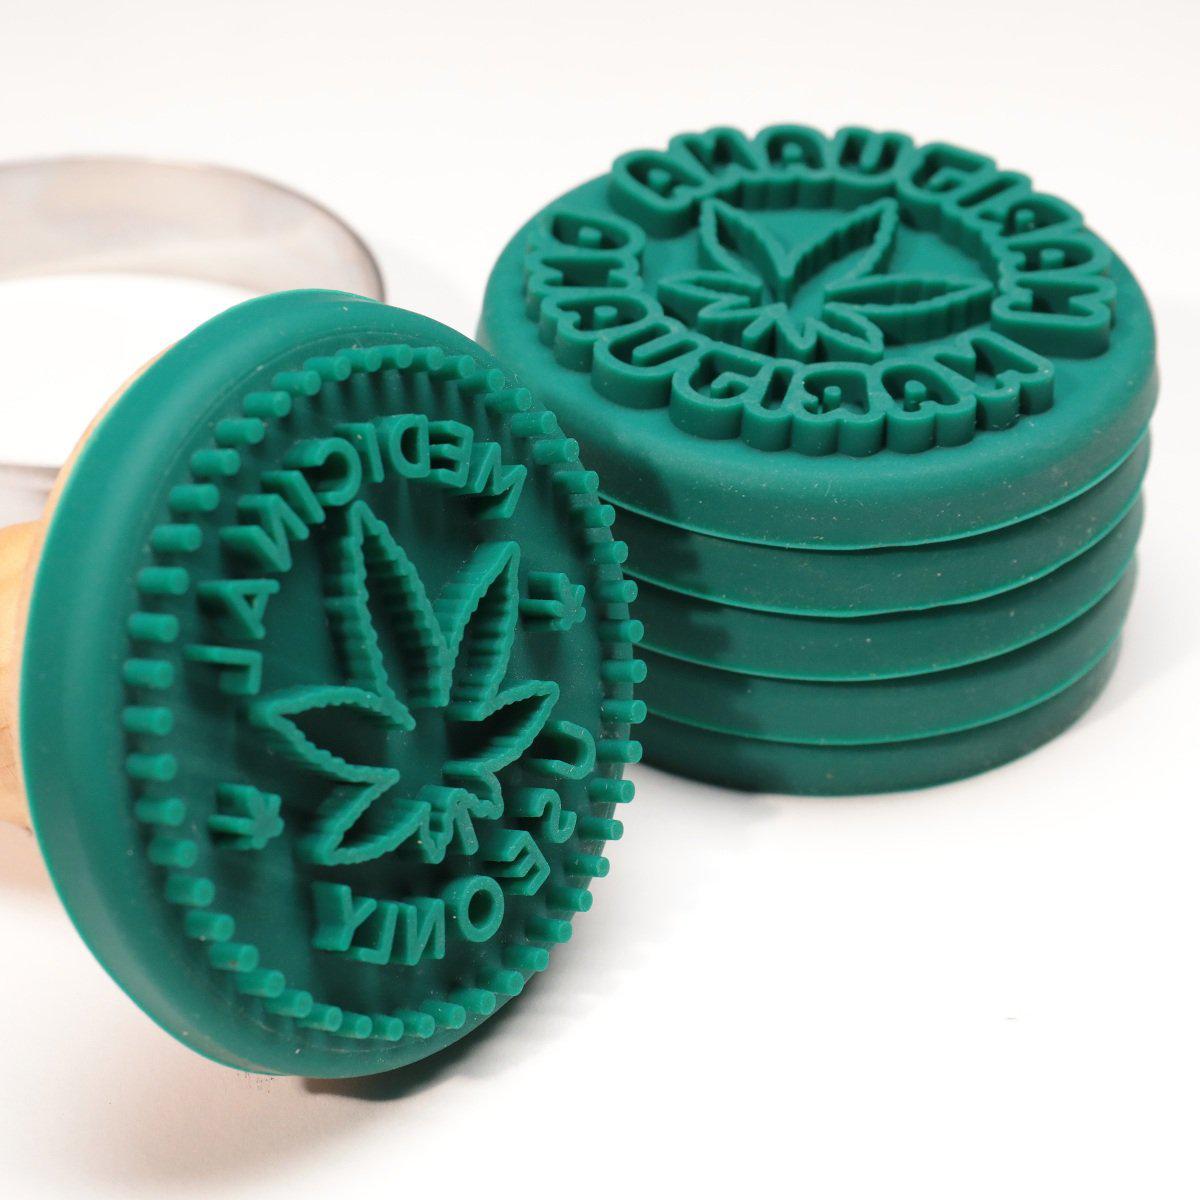 Marijuana Silicone Cookie Stamps, Cookie Cutter, Wood Handle, 6 Stamp Set